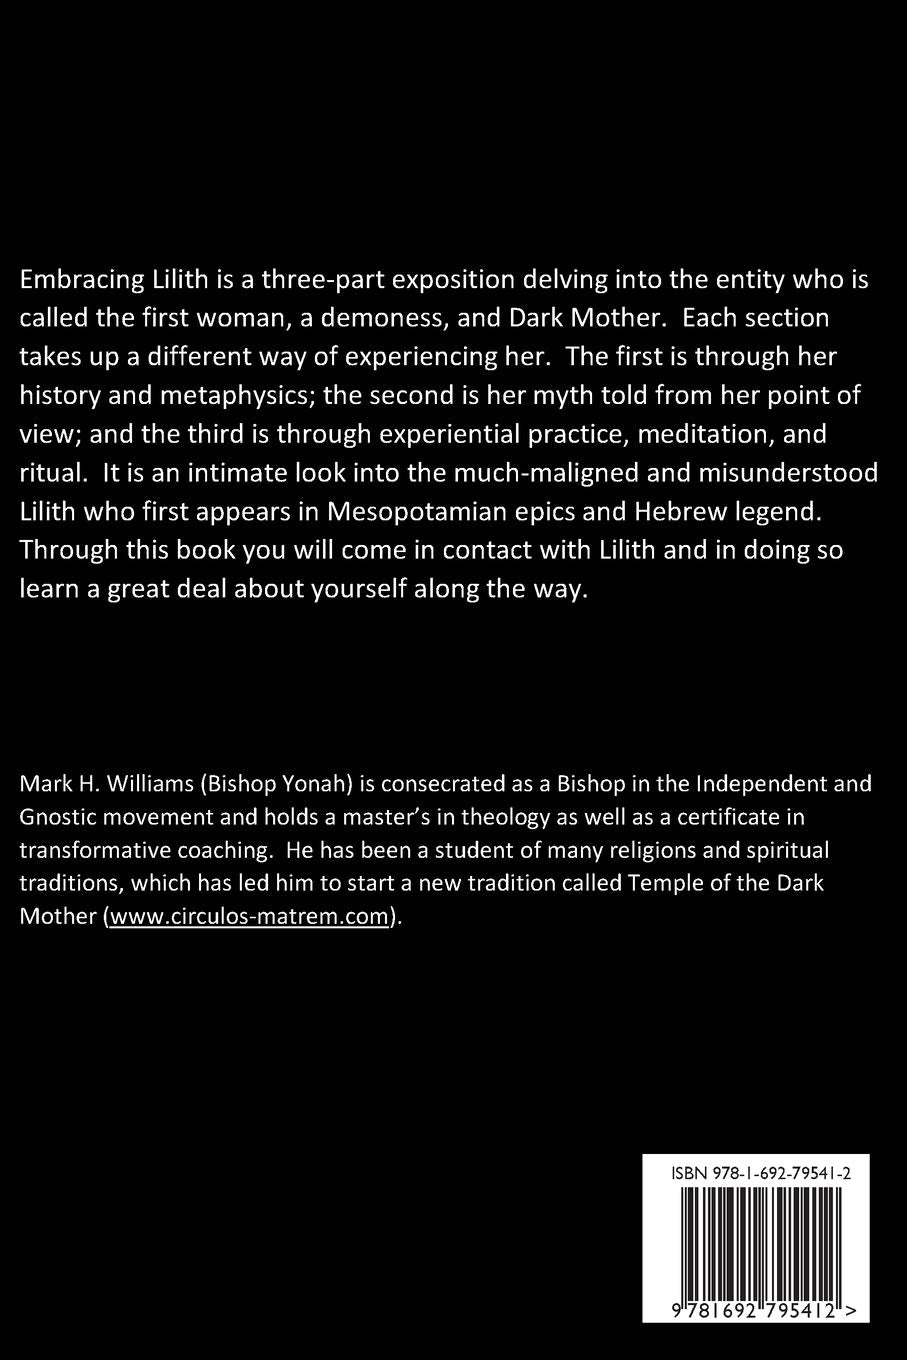 Embracing Lilith by Mark H. Williams - Signed Copy